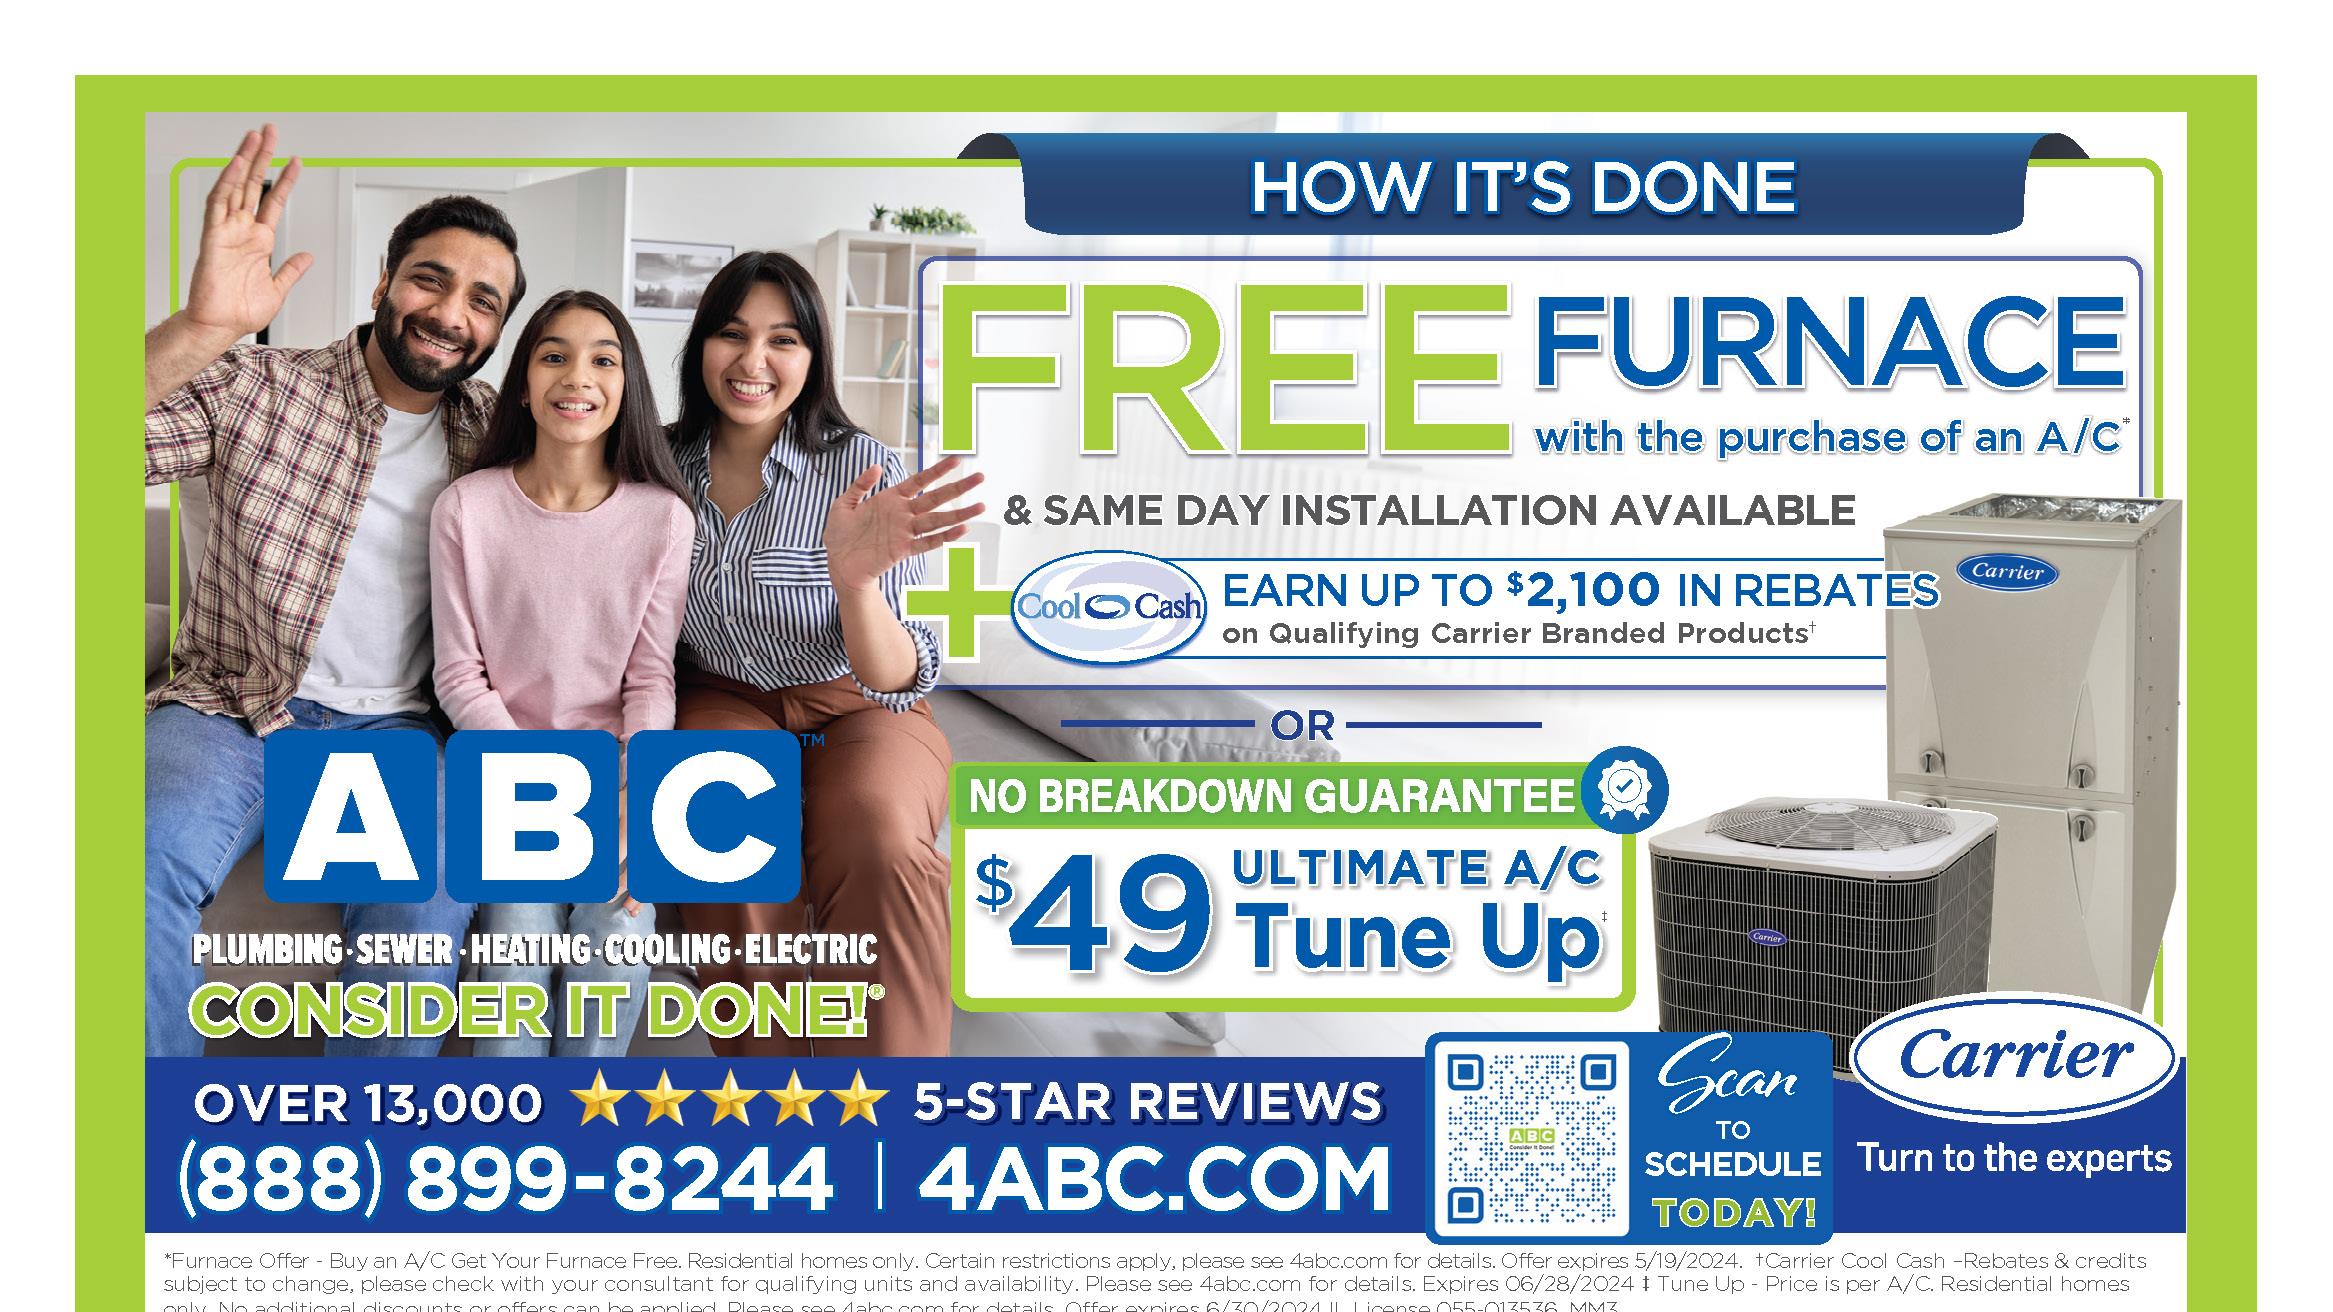 ABC Plumbing, Sewer, Heating, Cooling & Electric/Heating & AC                                                                                                                                                                                            